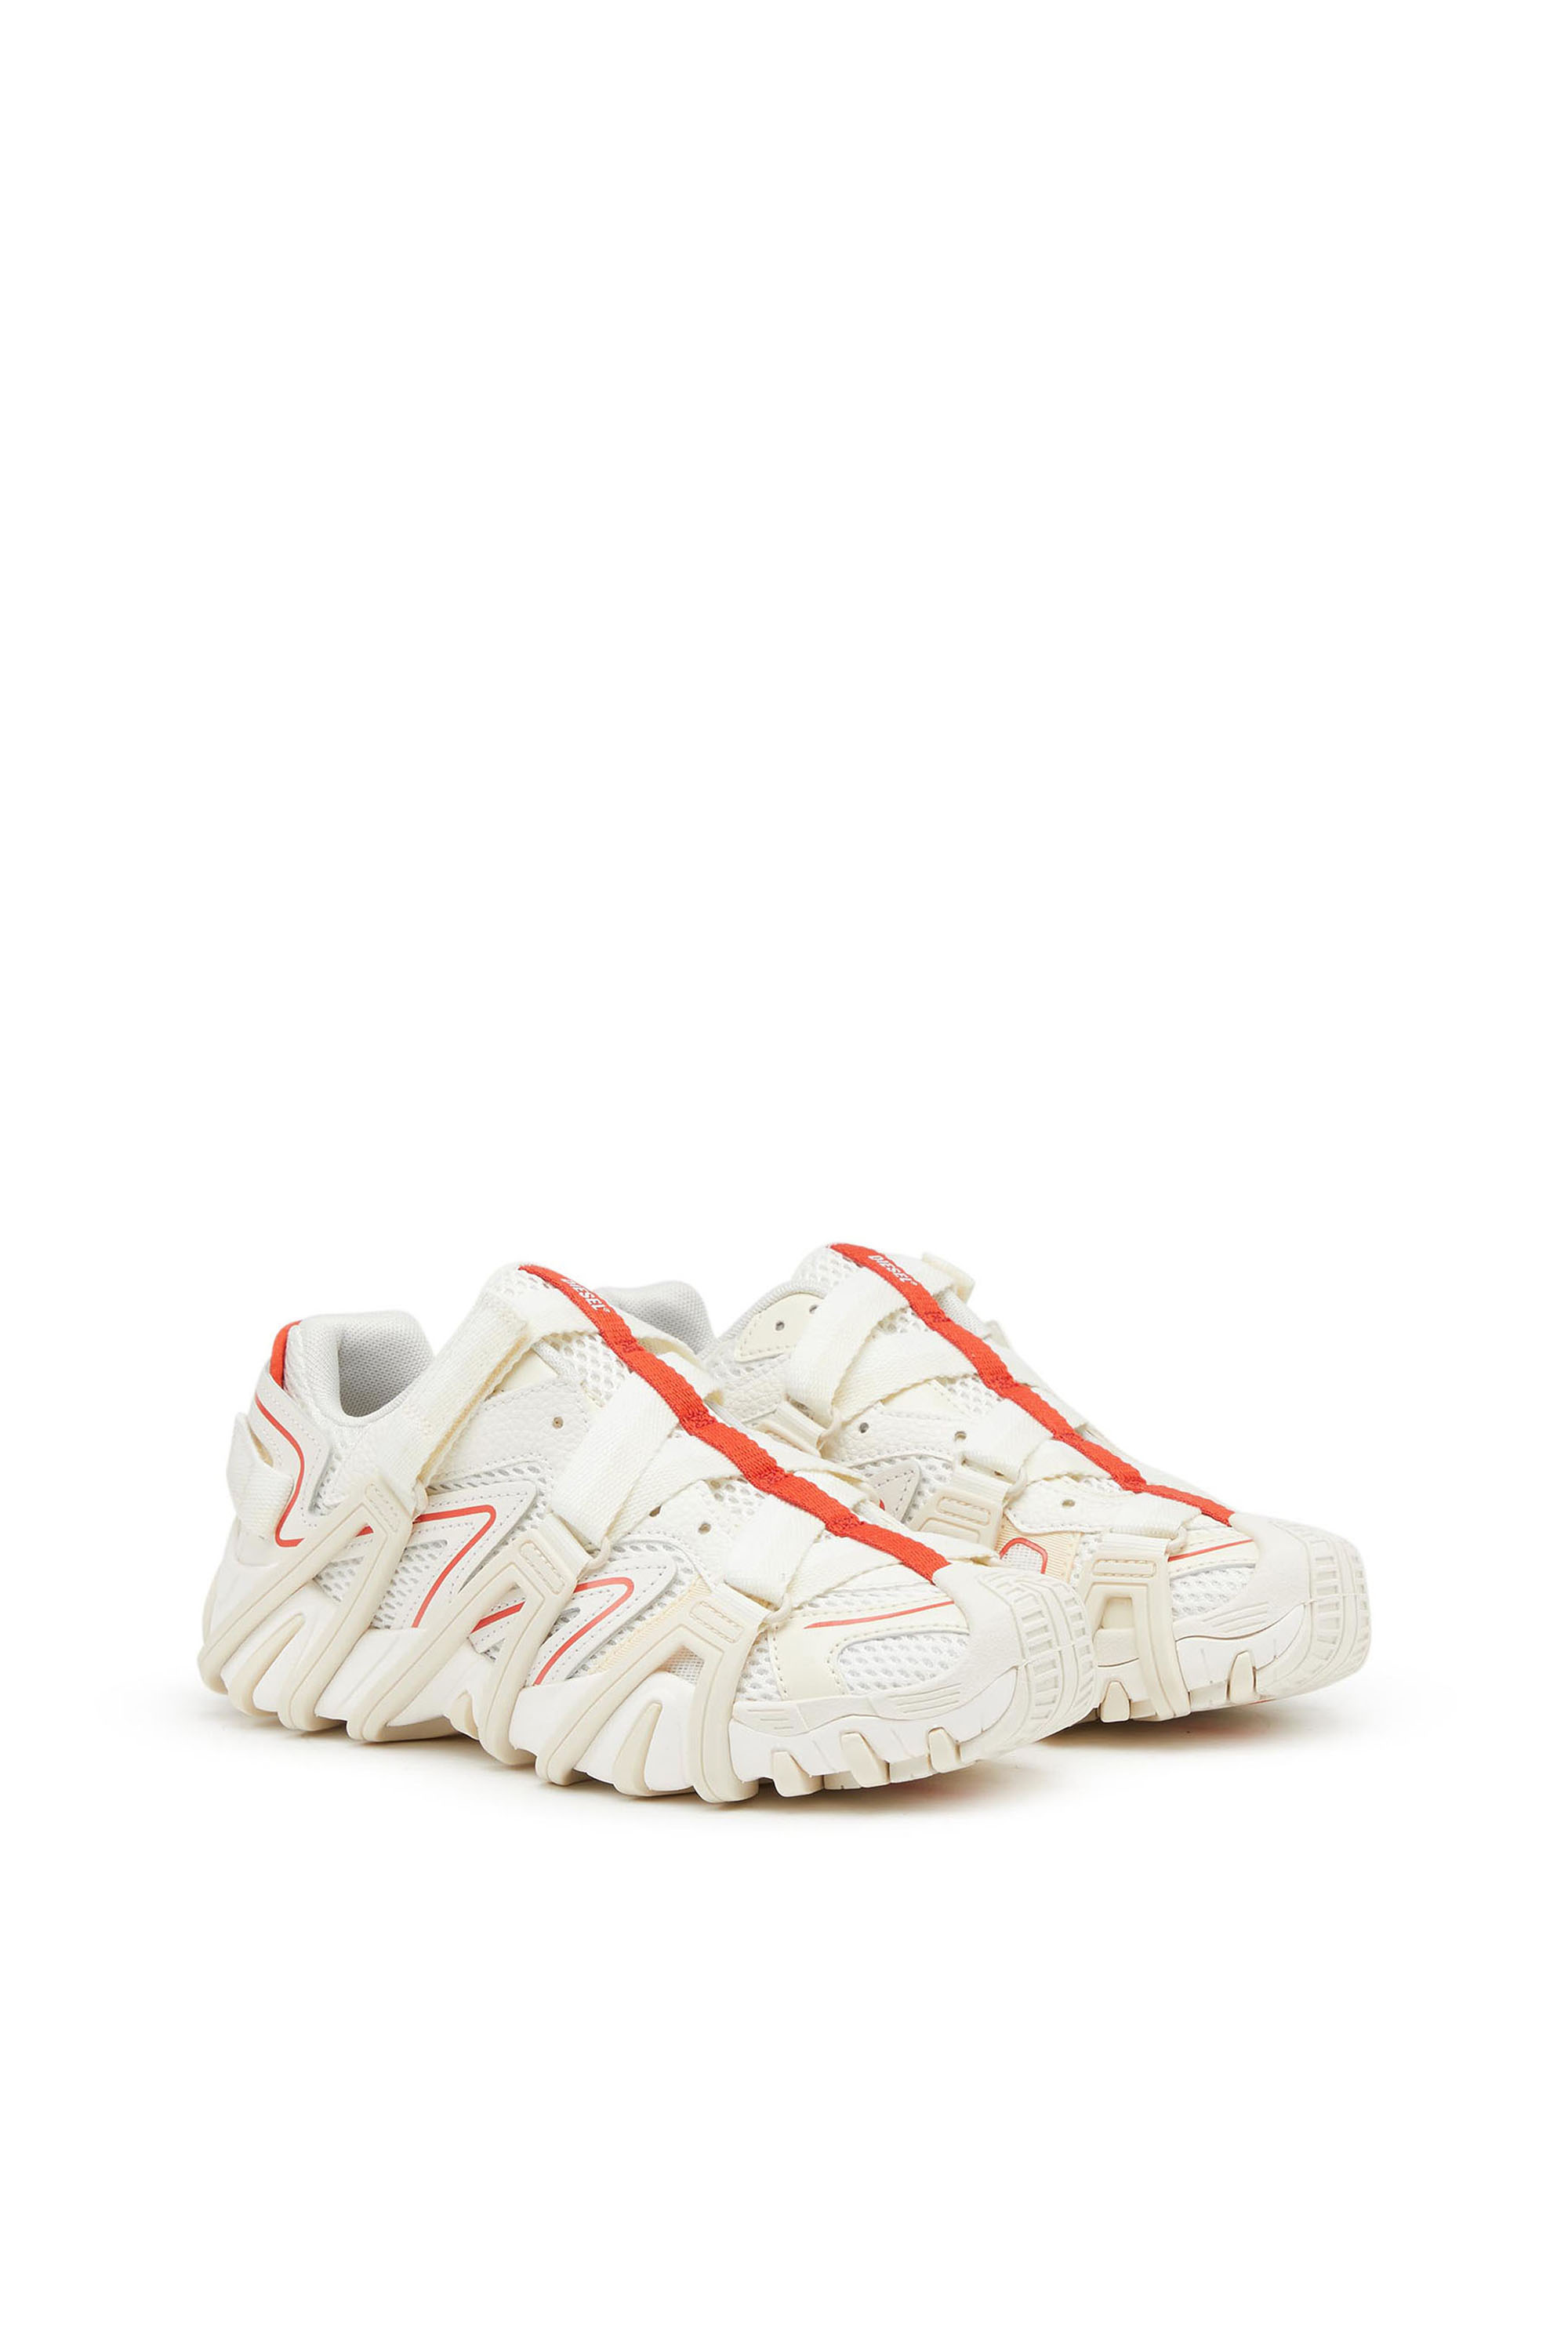 Diesel - S-PROTOTYPE-CR  W, Woman S-Prototype-CR  W - Cage sneakers in mesh and leather in Multicolor - Image 2